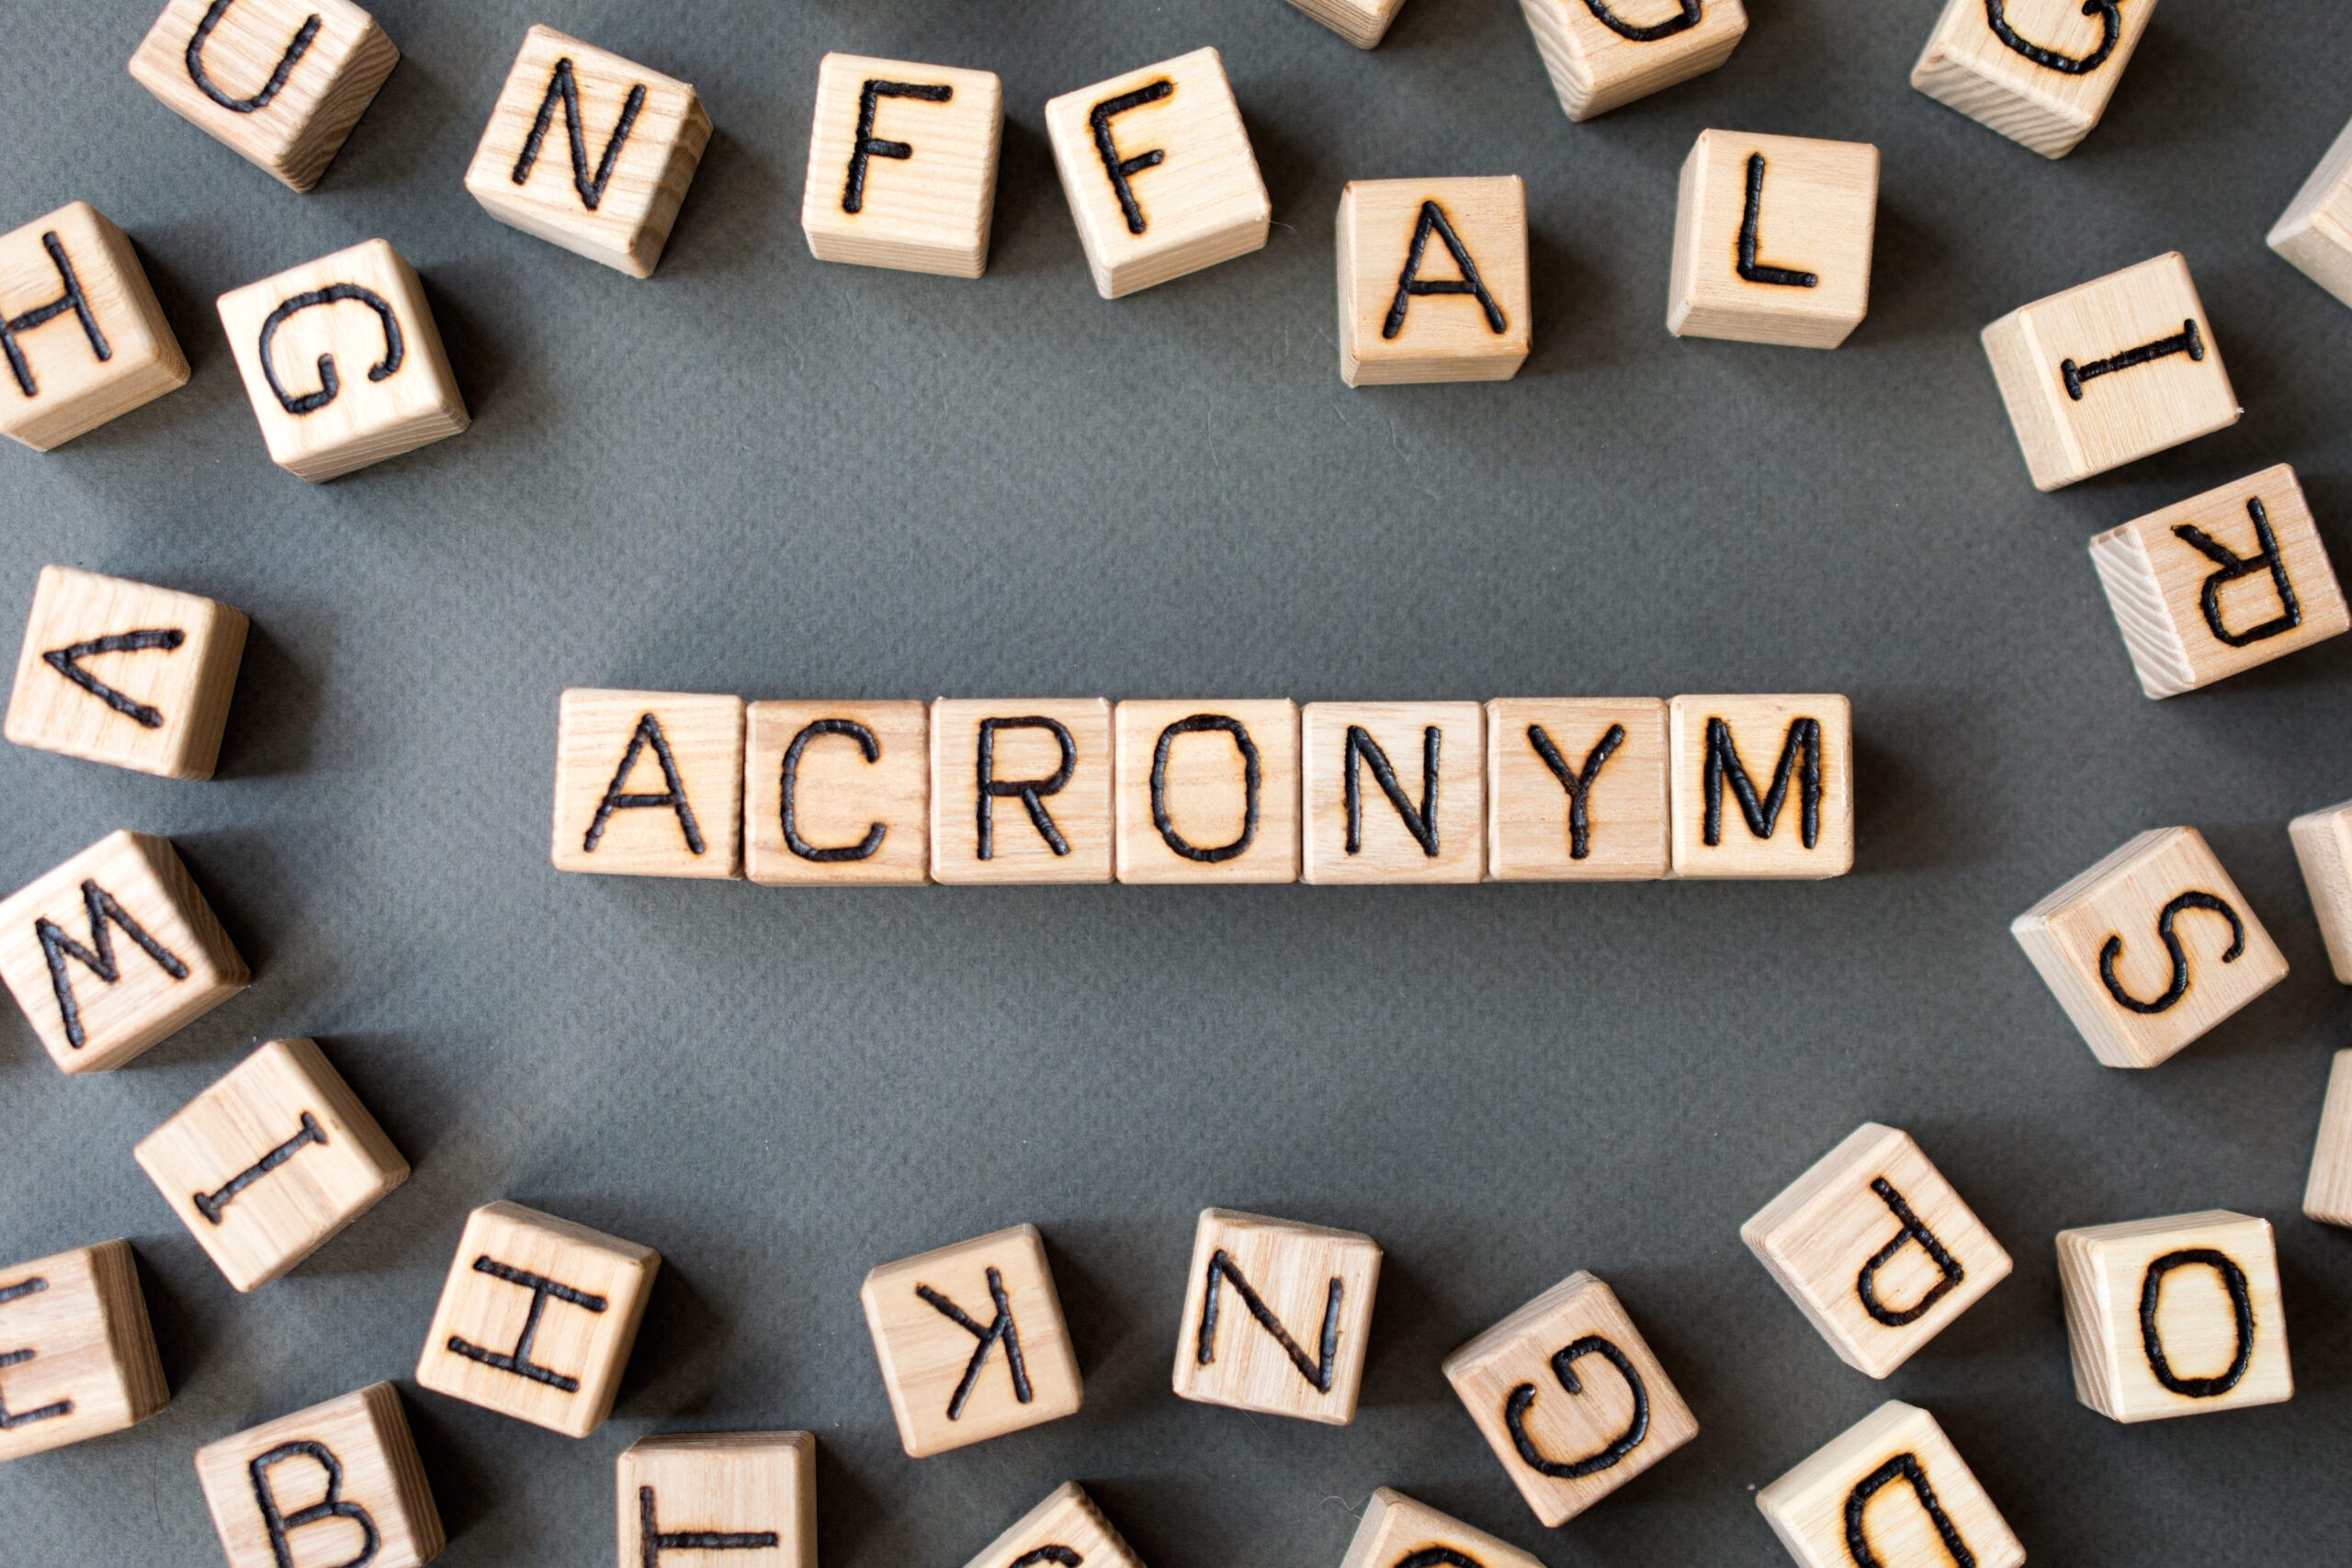 Acronyms 101: Essential Definitions for Tech and Marketing￼￼￼￼￼￼